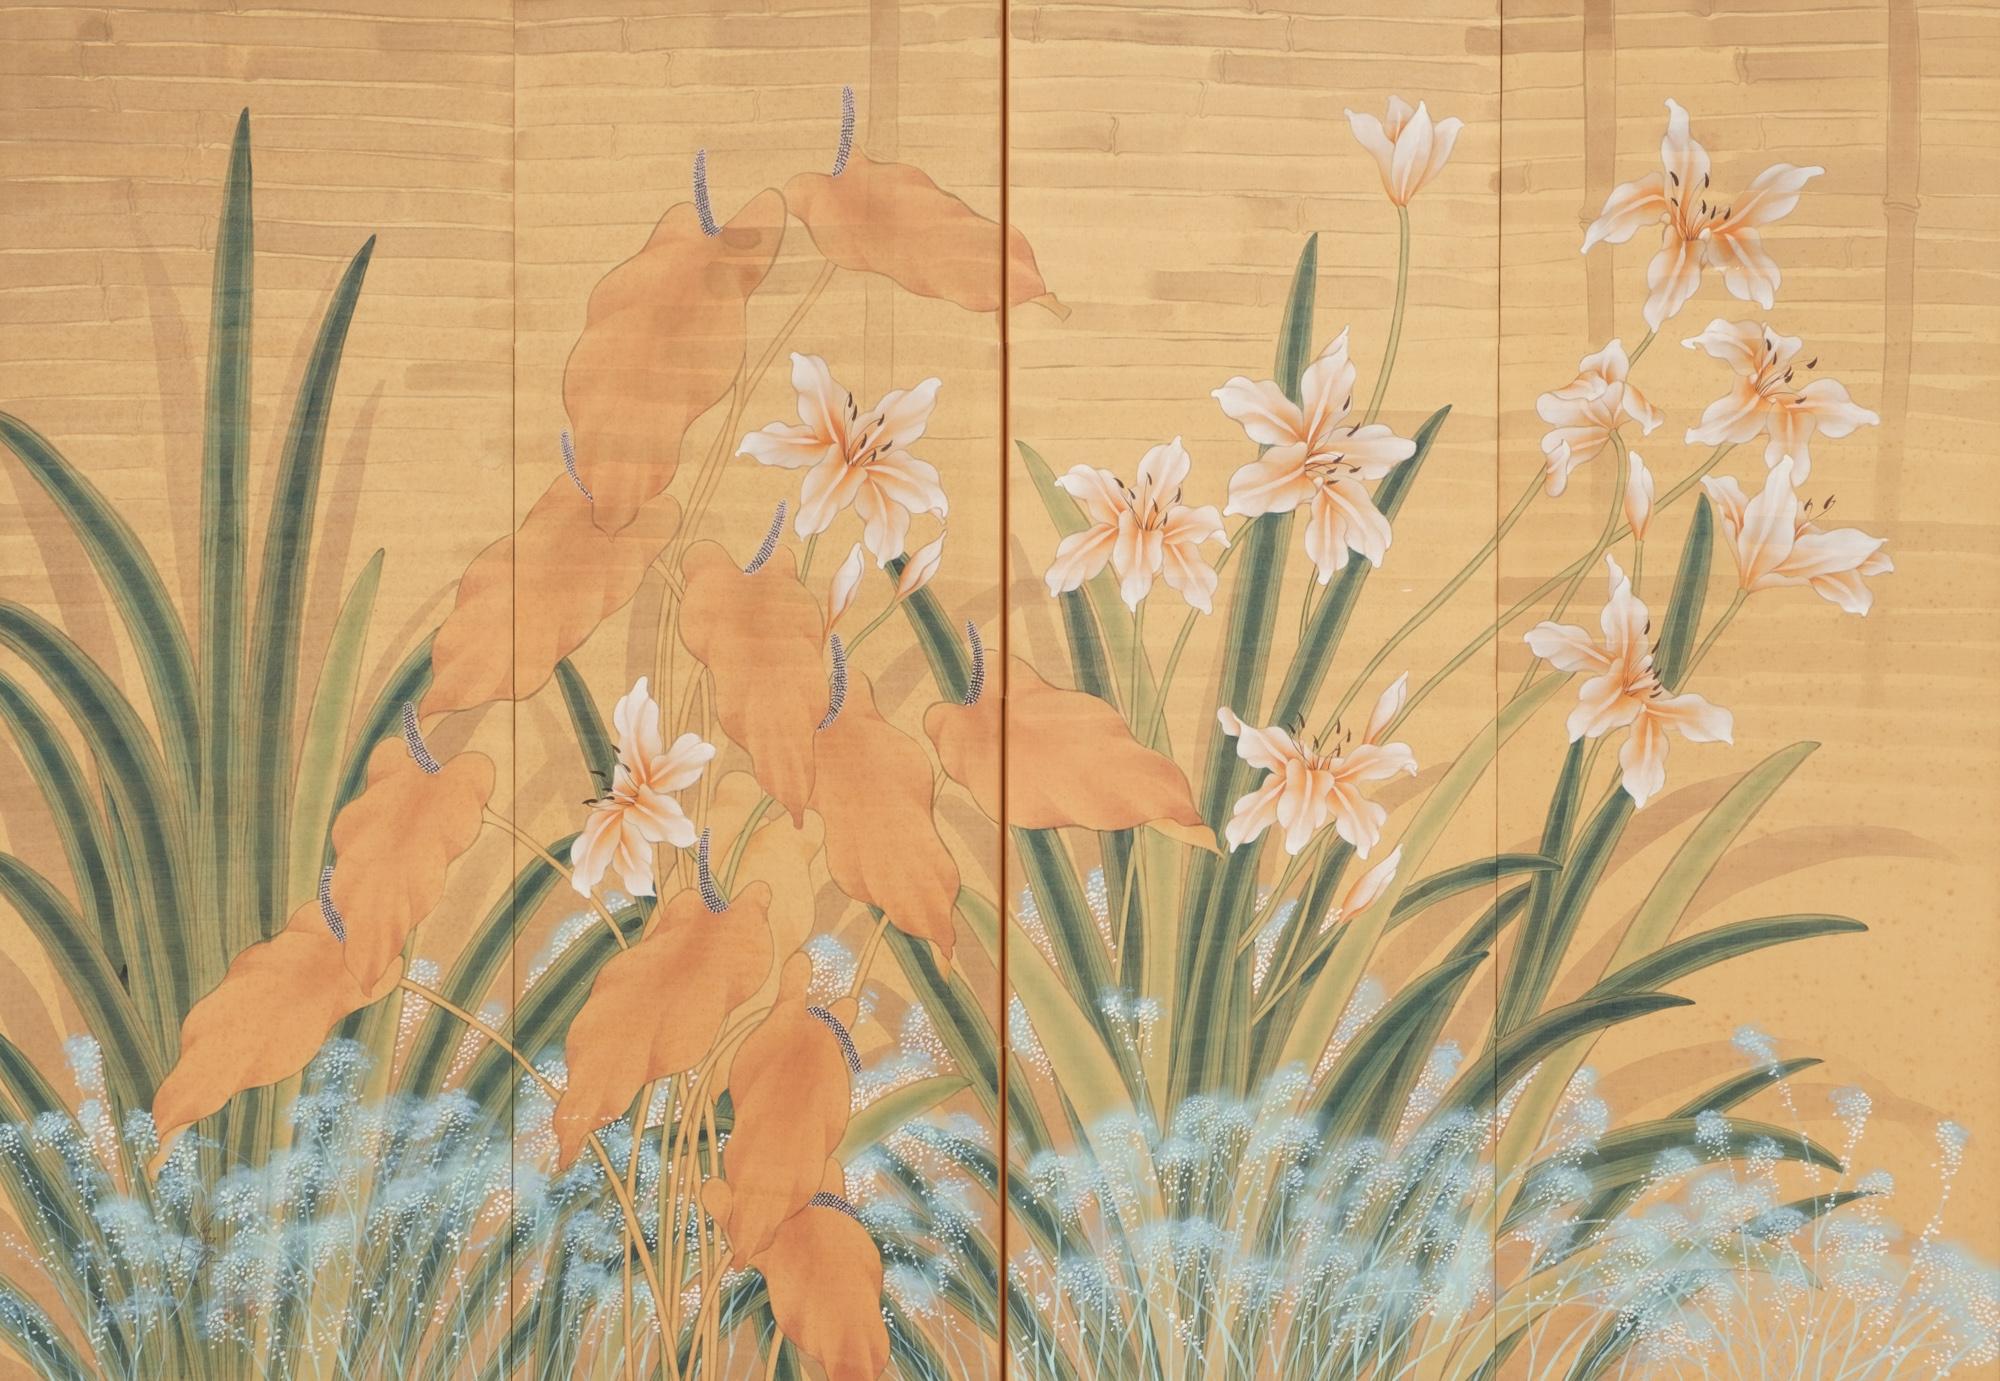 An impressive four-panel byôbu (room divider) with a refined painting of an exotic flower garden in front of a bamboo fence.

The garden is filled with all sorts of rare plants, like a ‘Painter’s Palettes’ (Anthurium andraeanum) with large